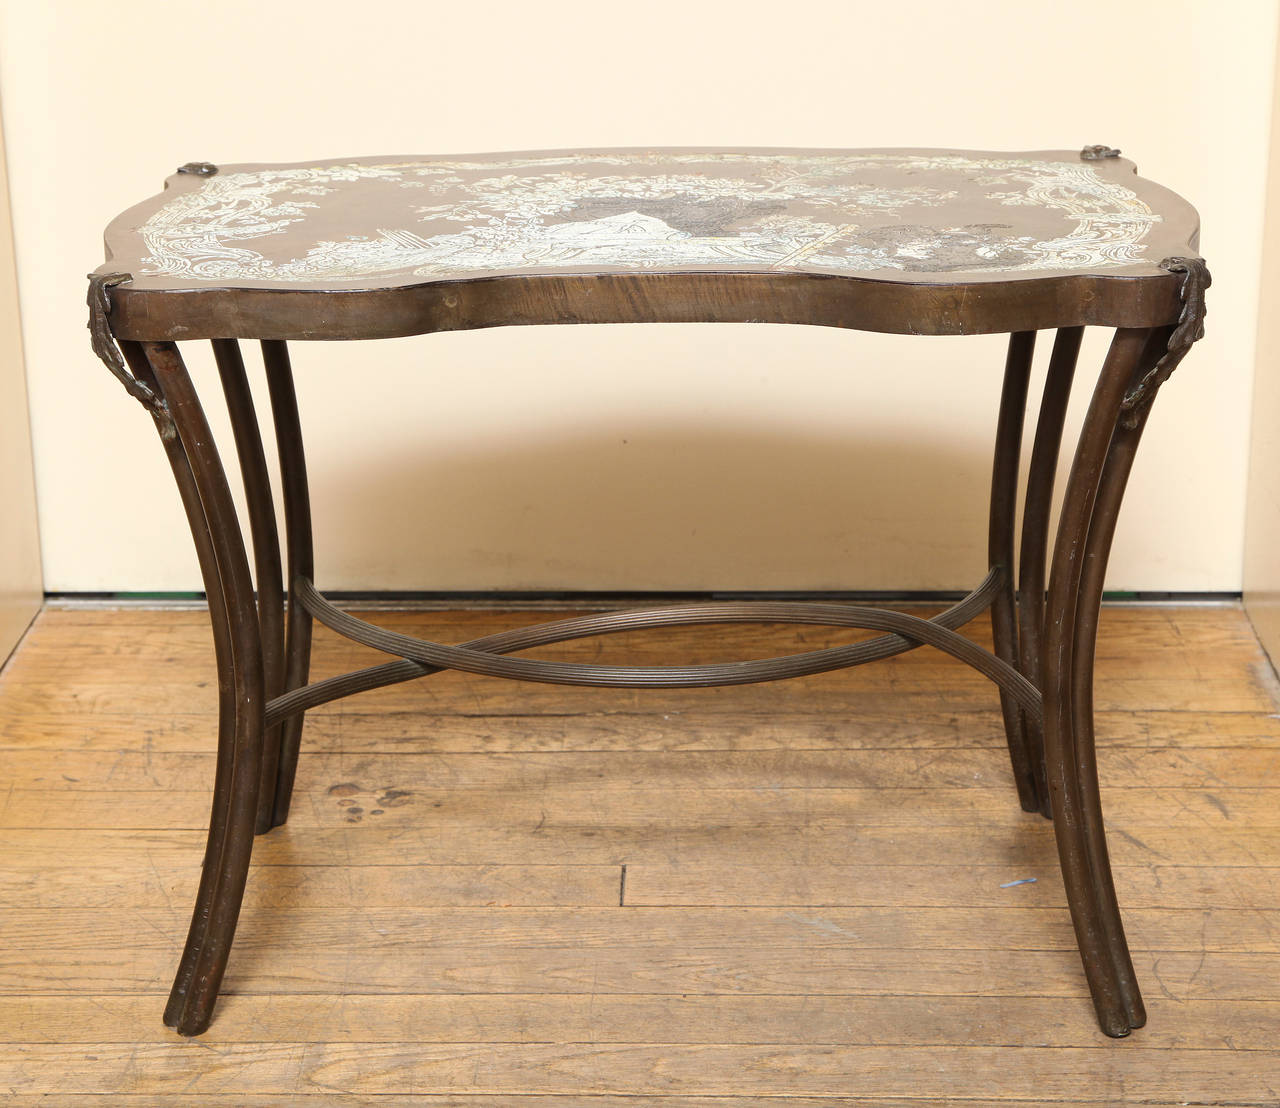 A rectangle serpentine edge low side table by Philip and Kelvin LaVerne, with tapering in swept legs in the form of two round turnings, with applied leaf decoration at each corner. The four legs joined by c-shaped stretchers. The top decorated with